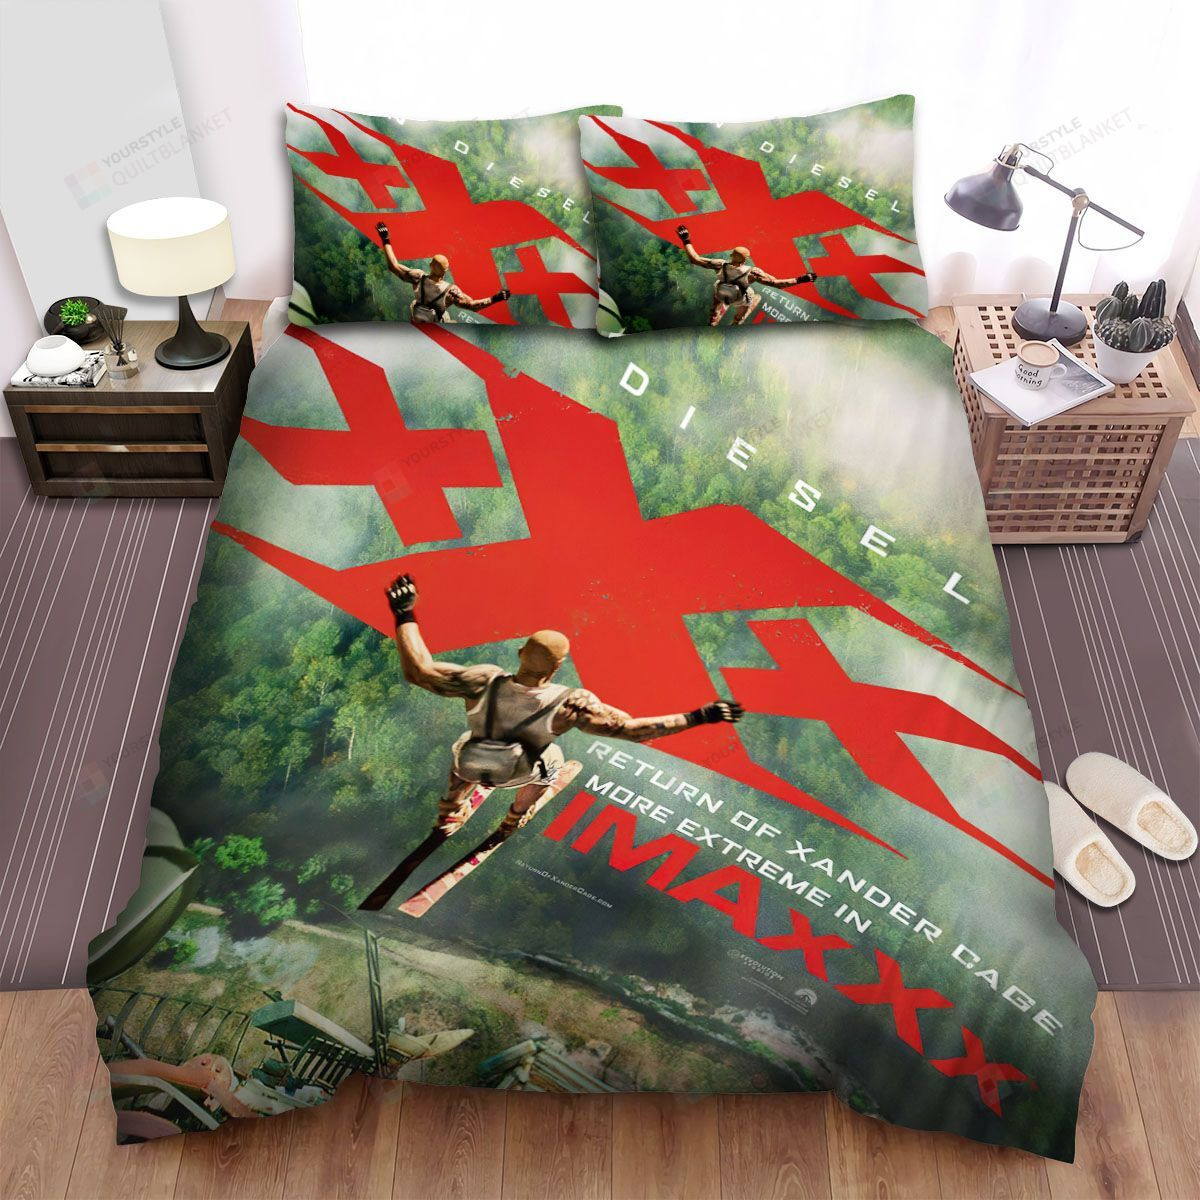 Xxx Return Of Xander Cage Movie Poster 4 Bed Sheets Duvet Cover Bedding Sets